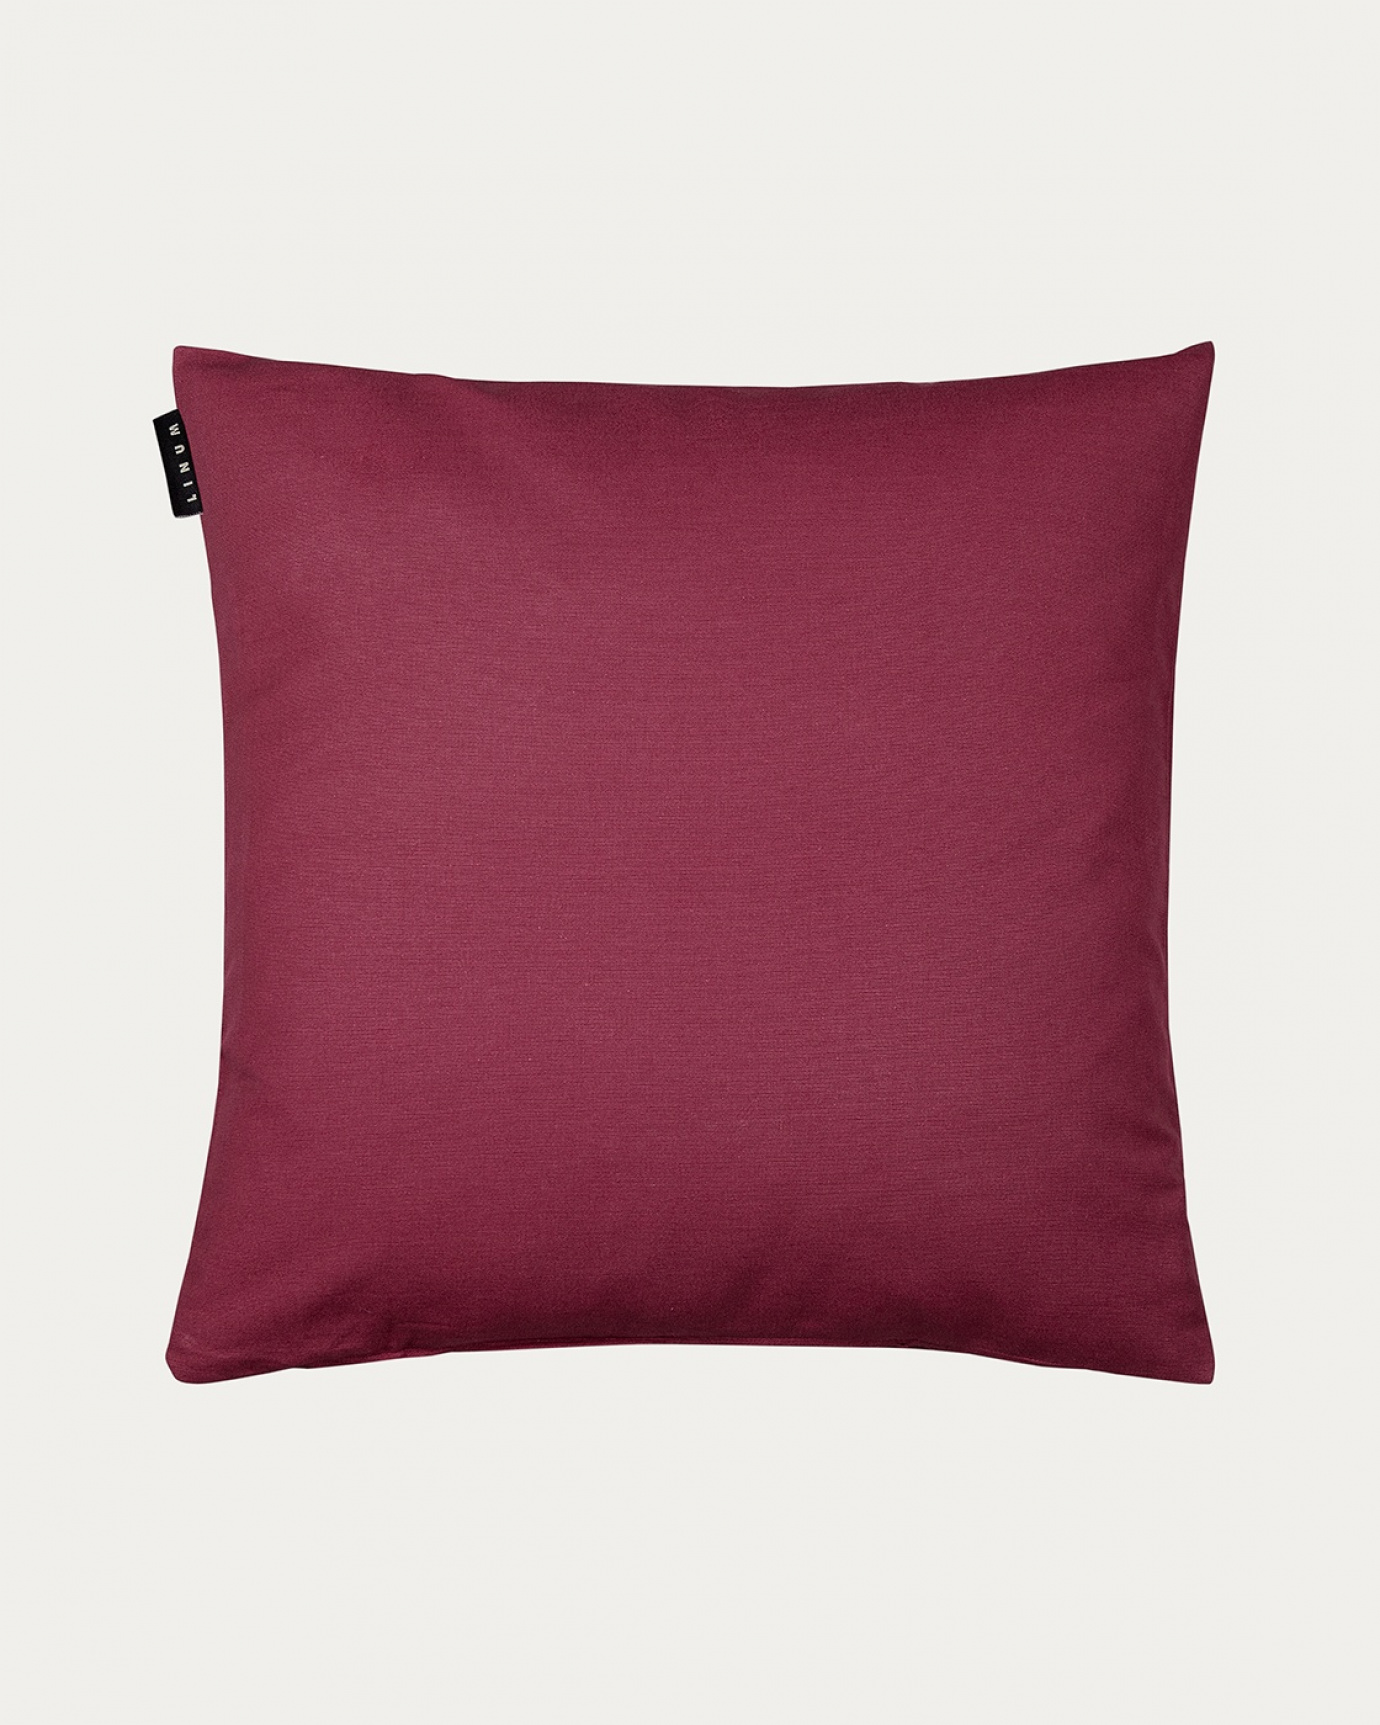 Product image pale wine red ANNABELL cushion cover made of soft cotton from LINUM DESIGN. Size 50x50 cm.